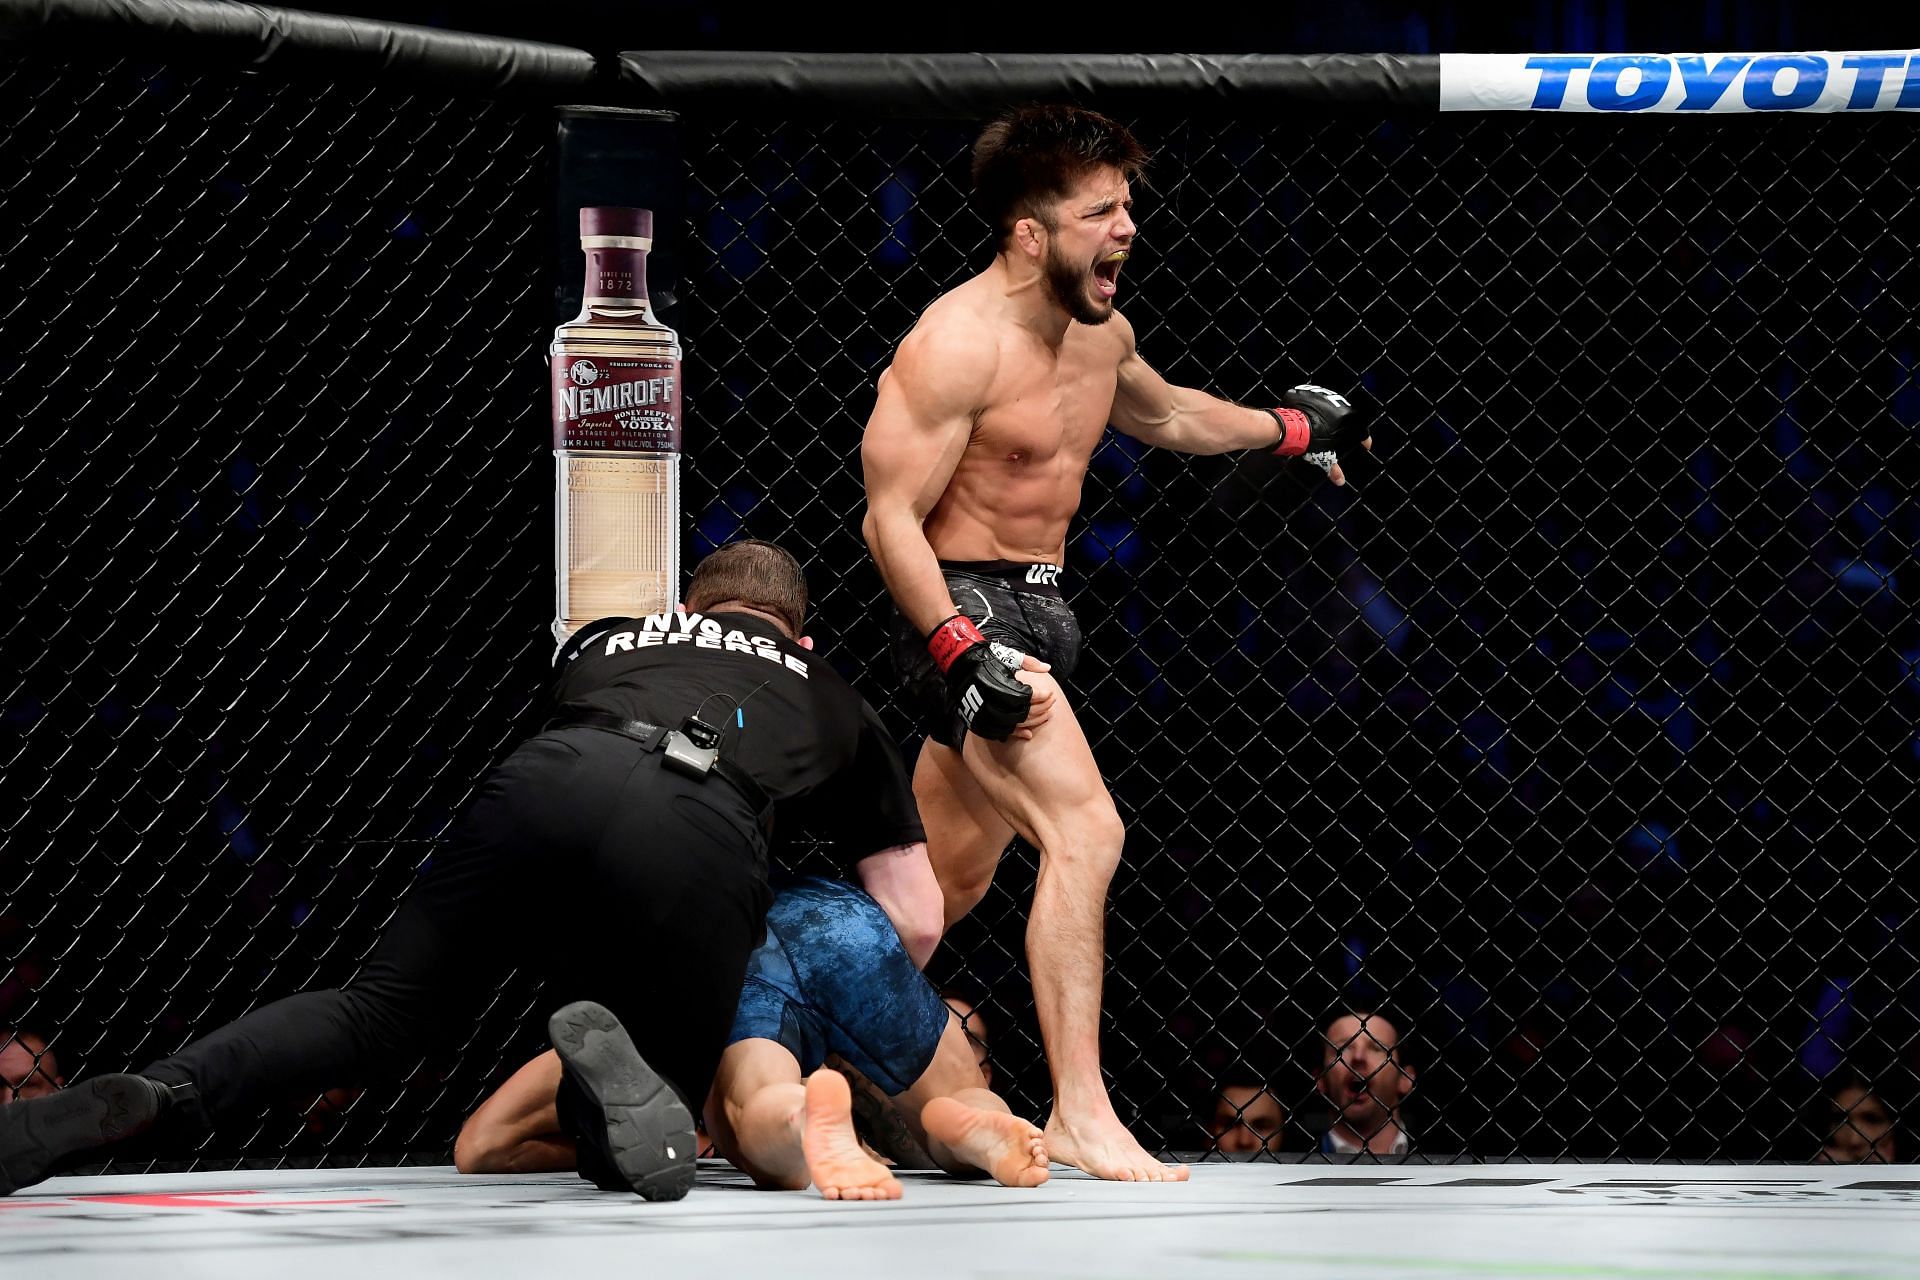 Henry Cejudo stunned everyone with his destruction of TJ Dillashaw